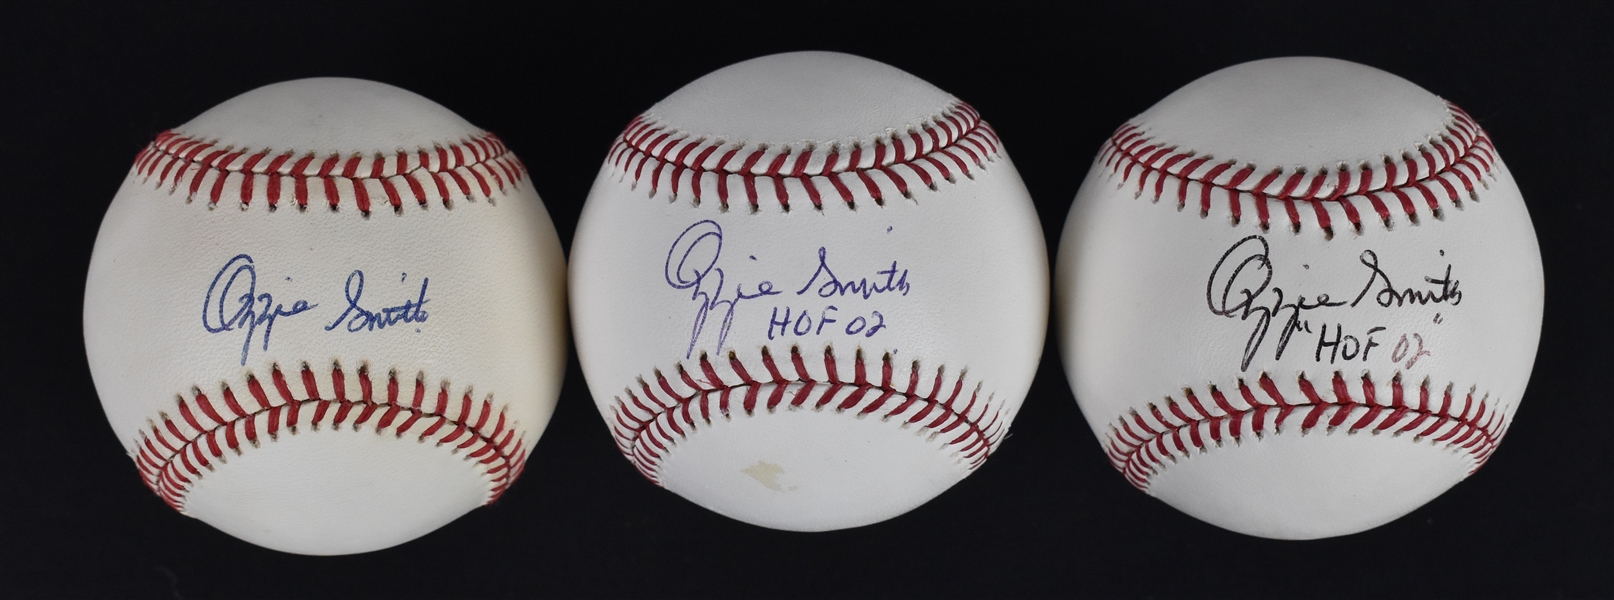 Collection of 3 Autographed Baseballs w/Ozzie Smith